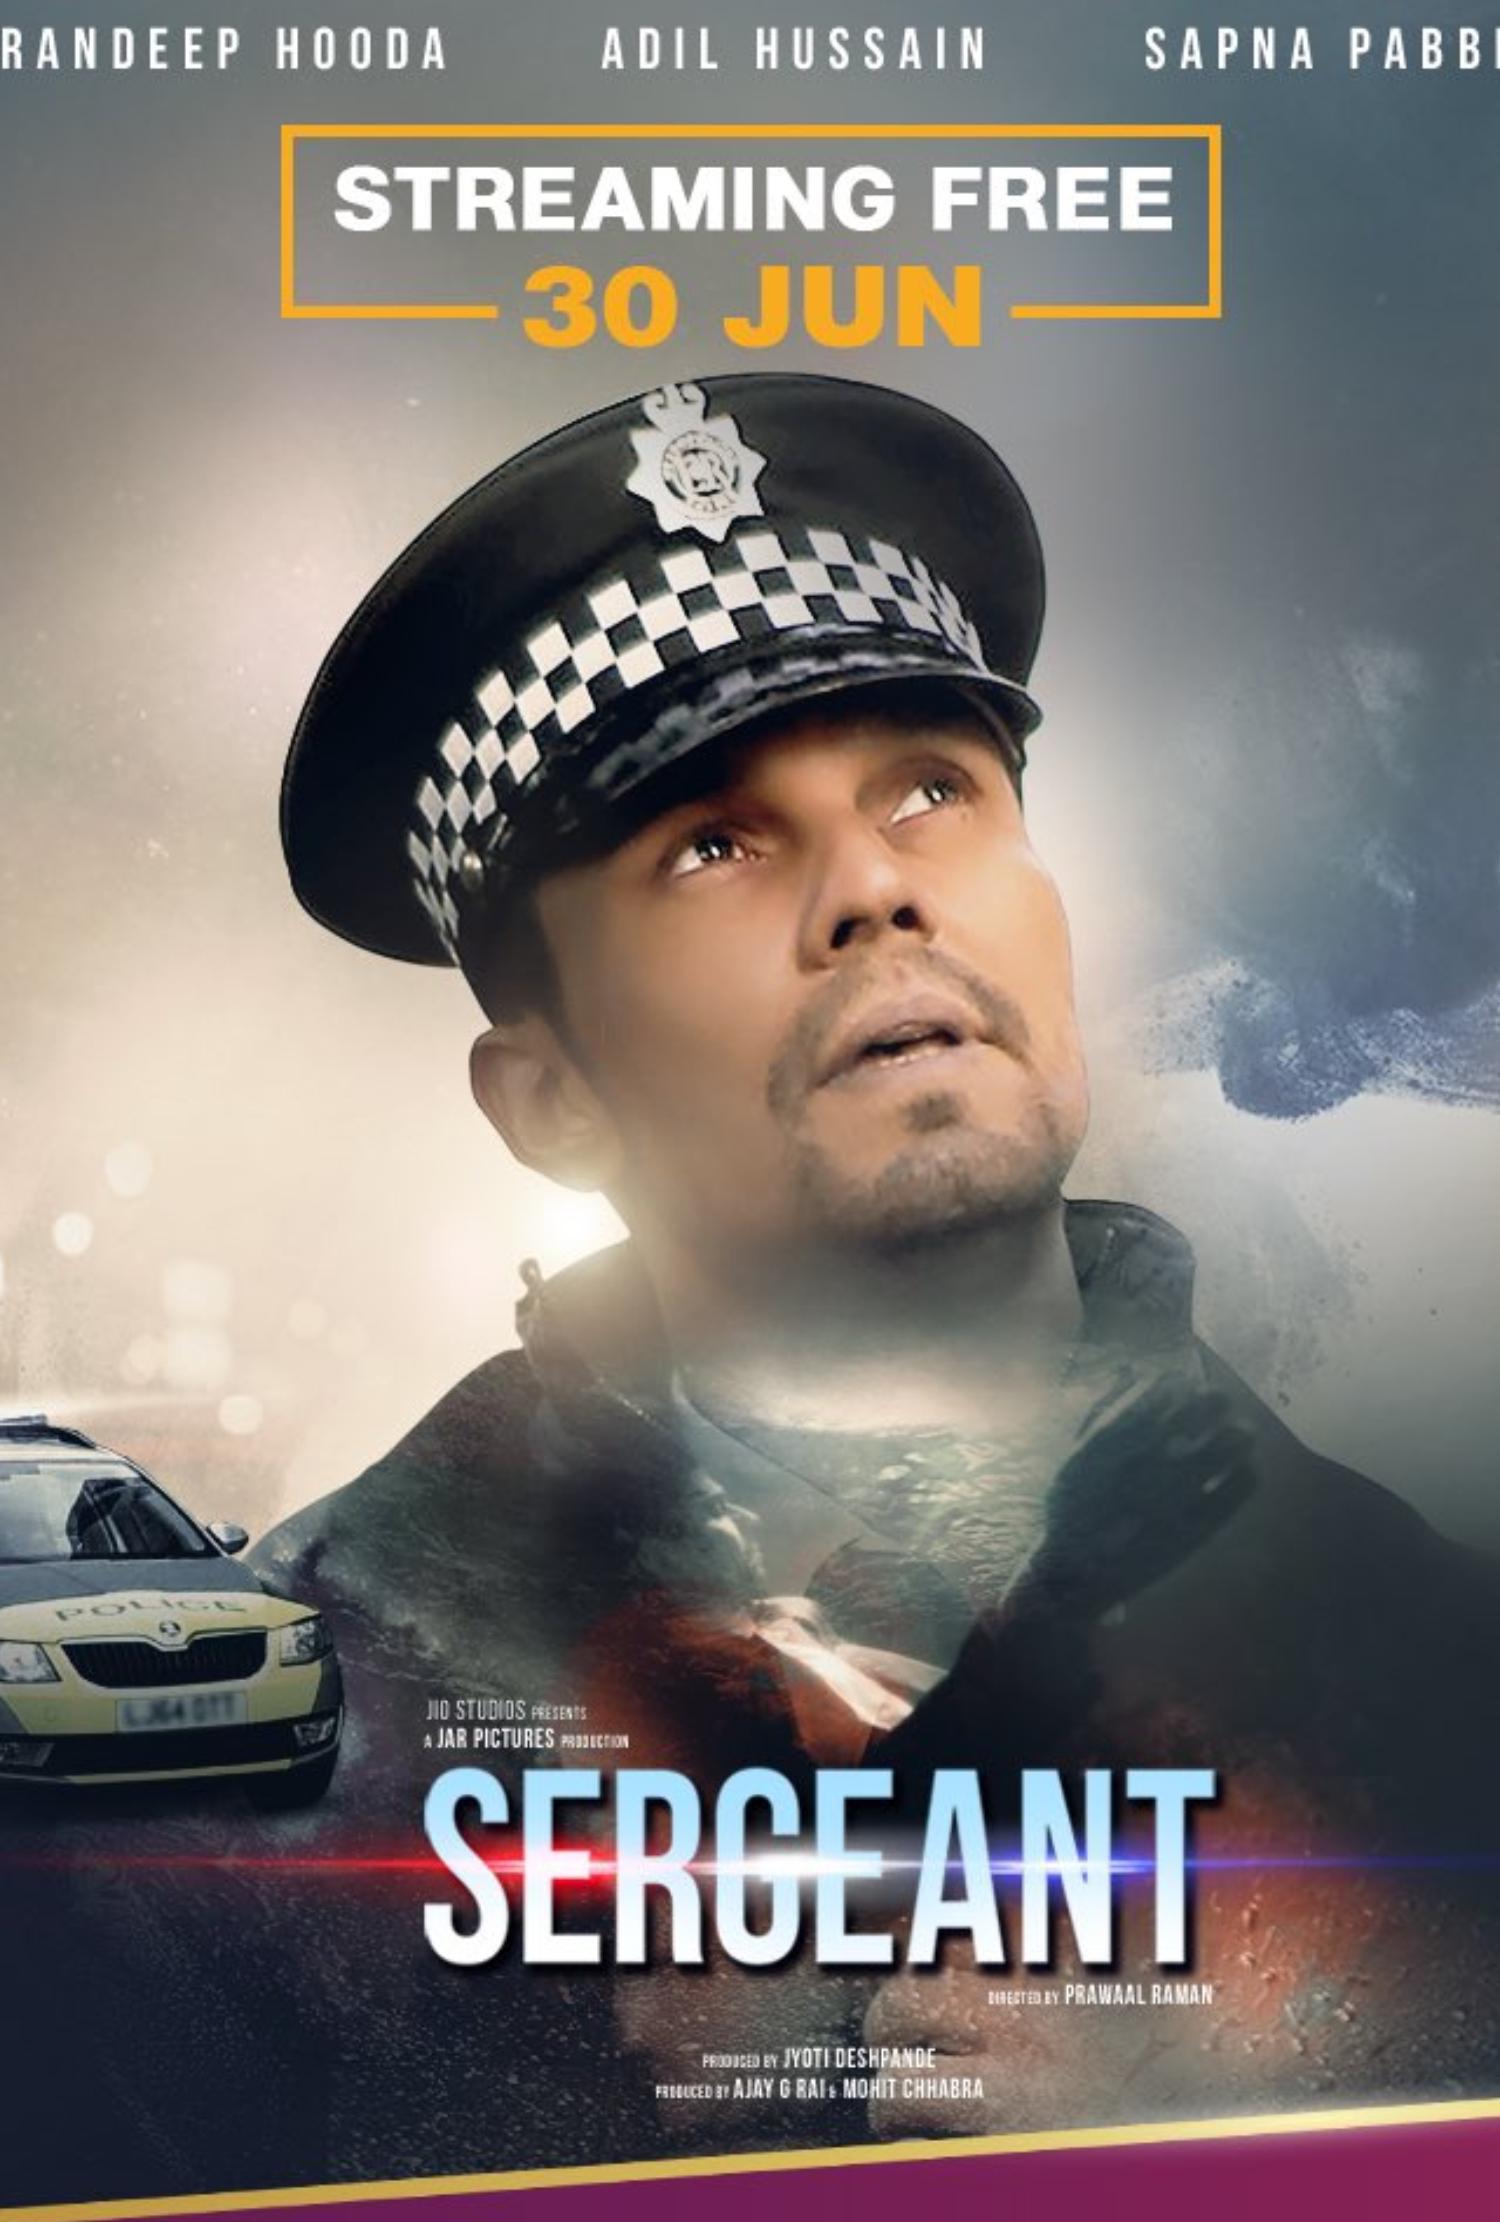 Sergeant (June 30) - Randeep Hooda takes charge in the lead role of 